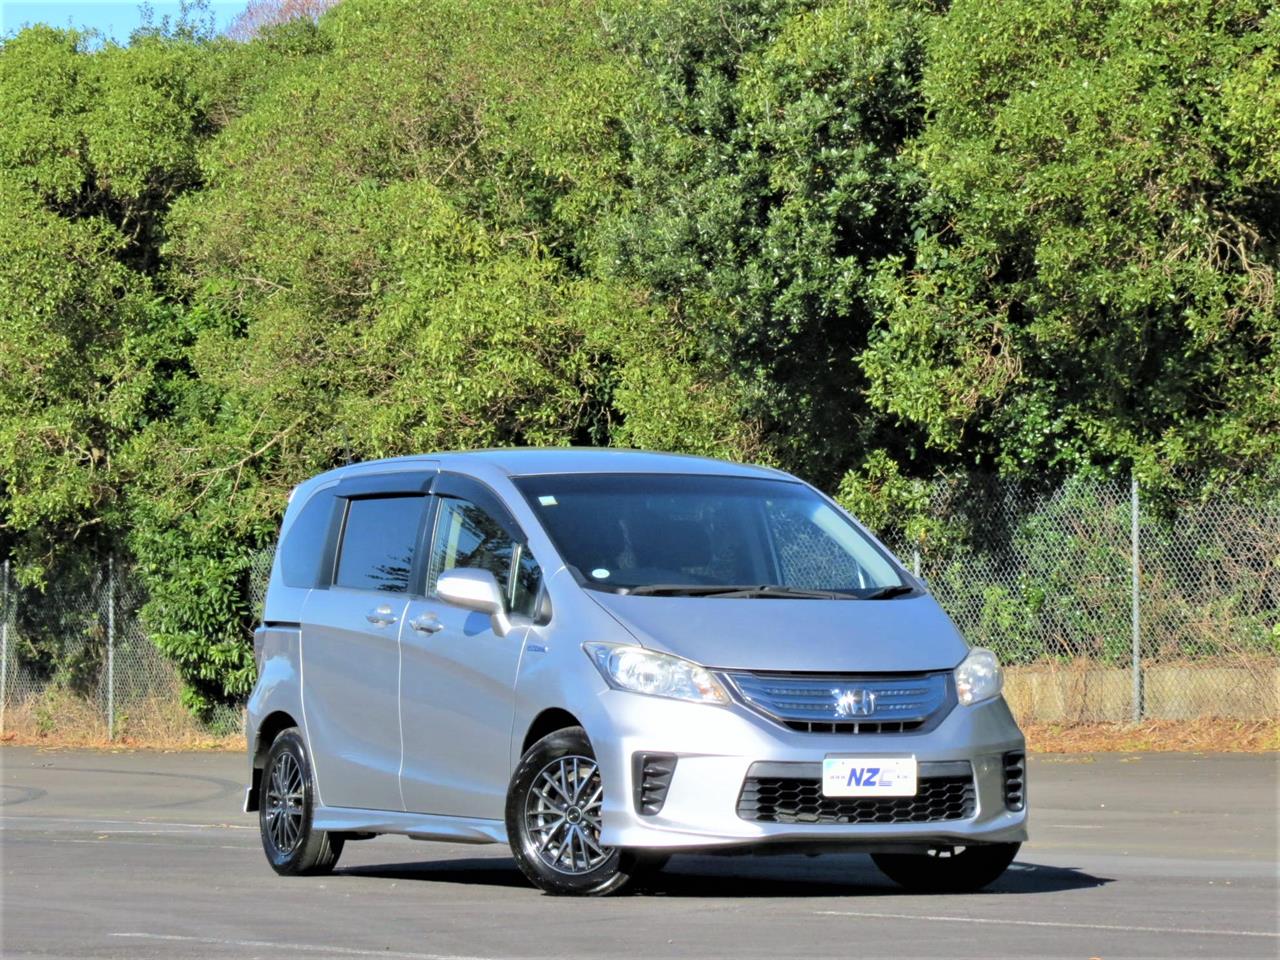 NZC 2012 Honda Freed just arrived to Auckland